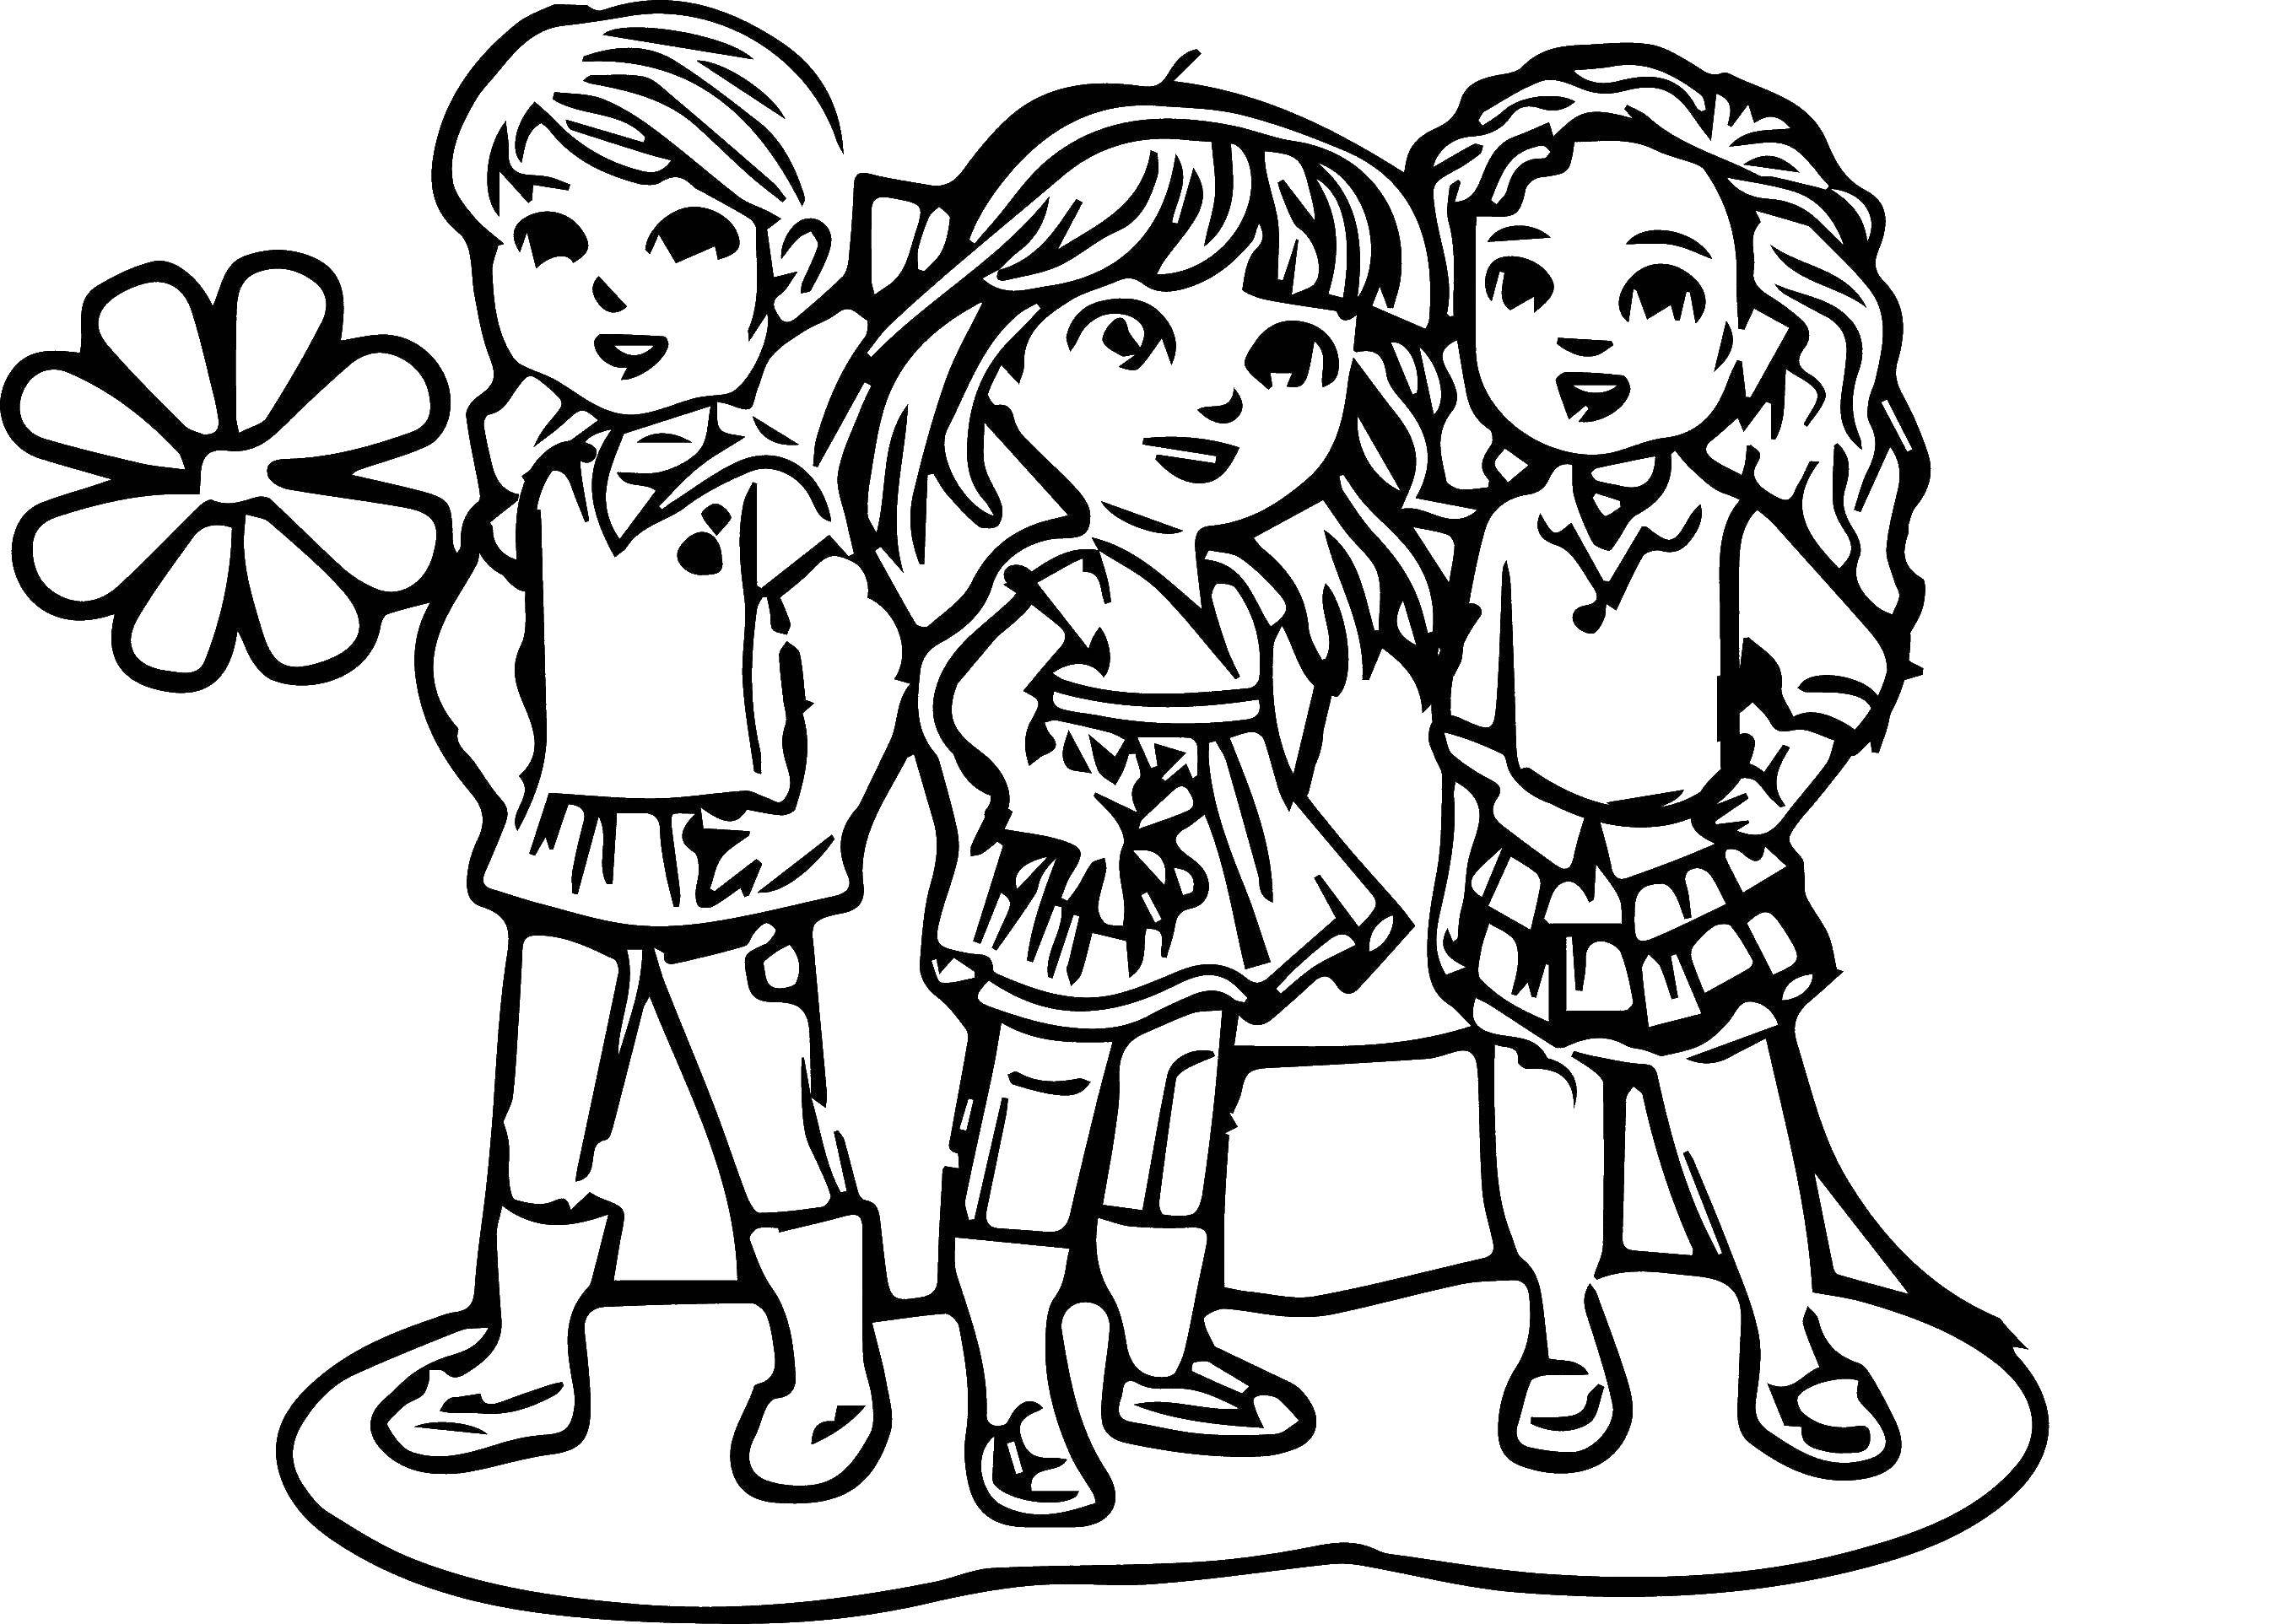 Coloring Girl fashionista. Category For girls. Tags:  girl , fashionista.